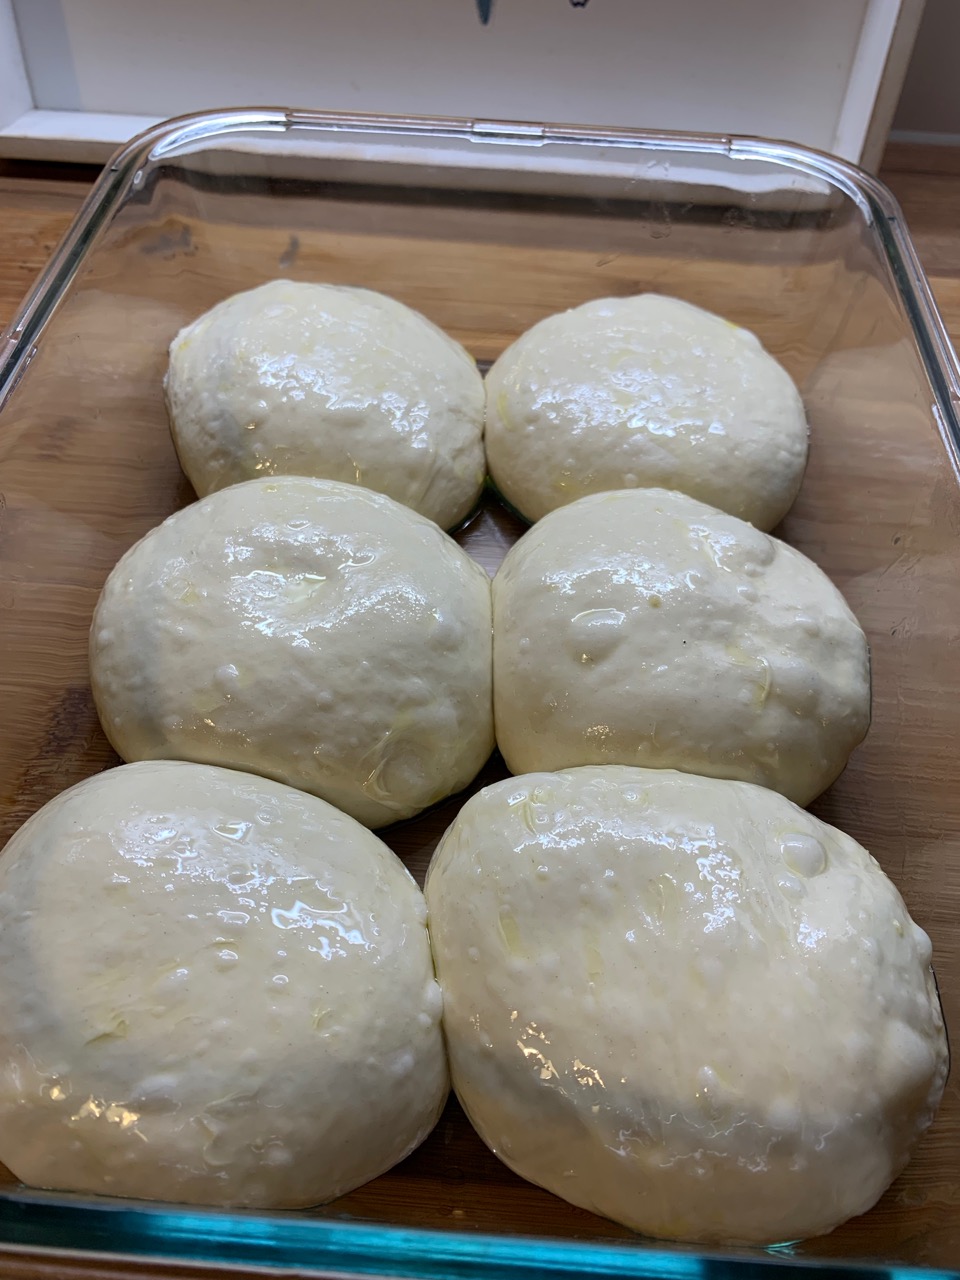 This is how my dough balls look in the container